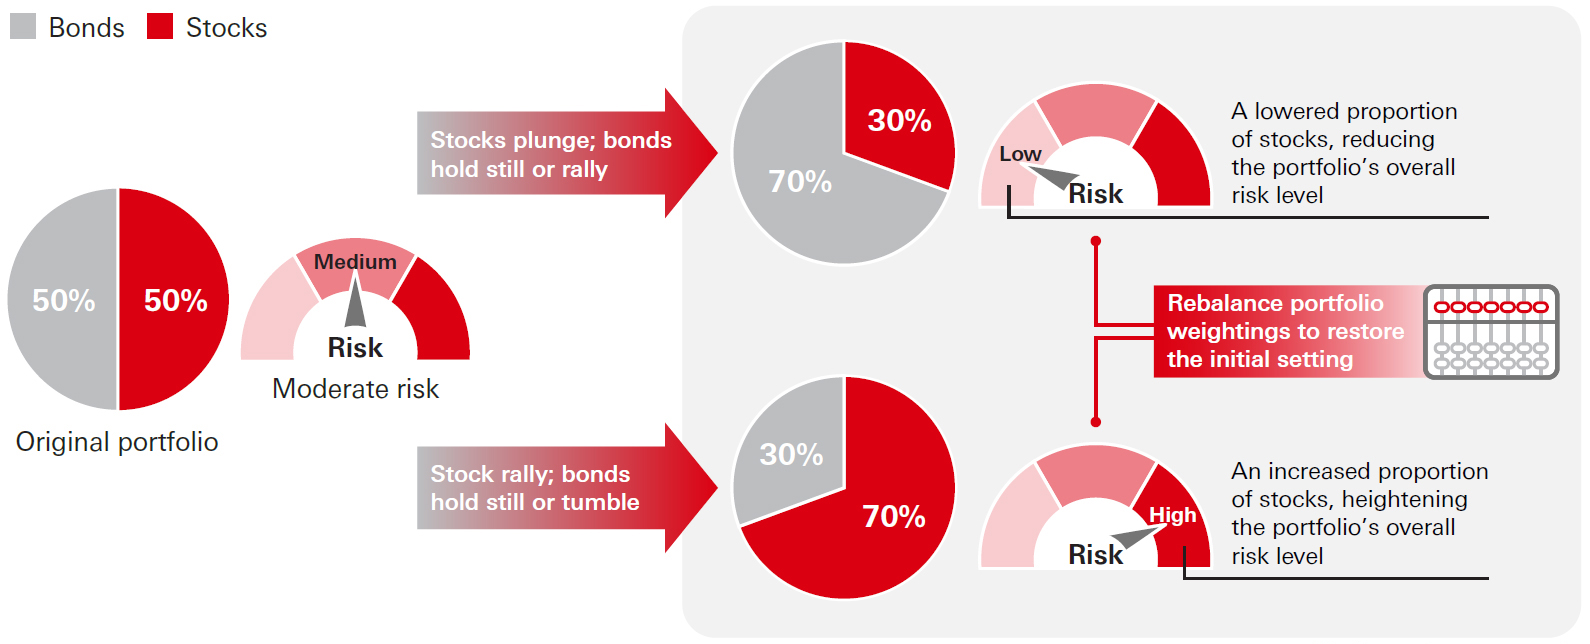 In an investment portfolio, the relative weights of different asset classes may change due to market fluctuations, which lead to a shifted asset allocation that deviates from the original target. In this case, rebalancing the portfolio will mean restoring the weightings of portfolio assets to the original designed levels.
